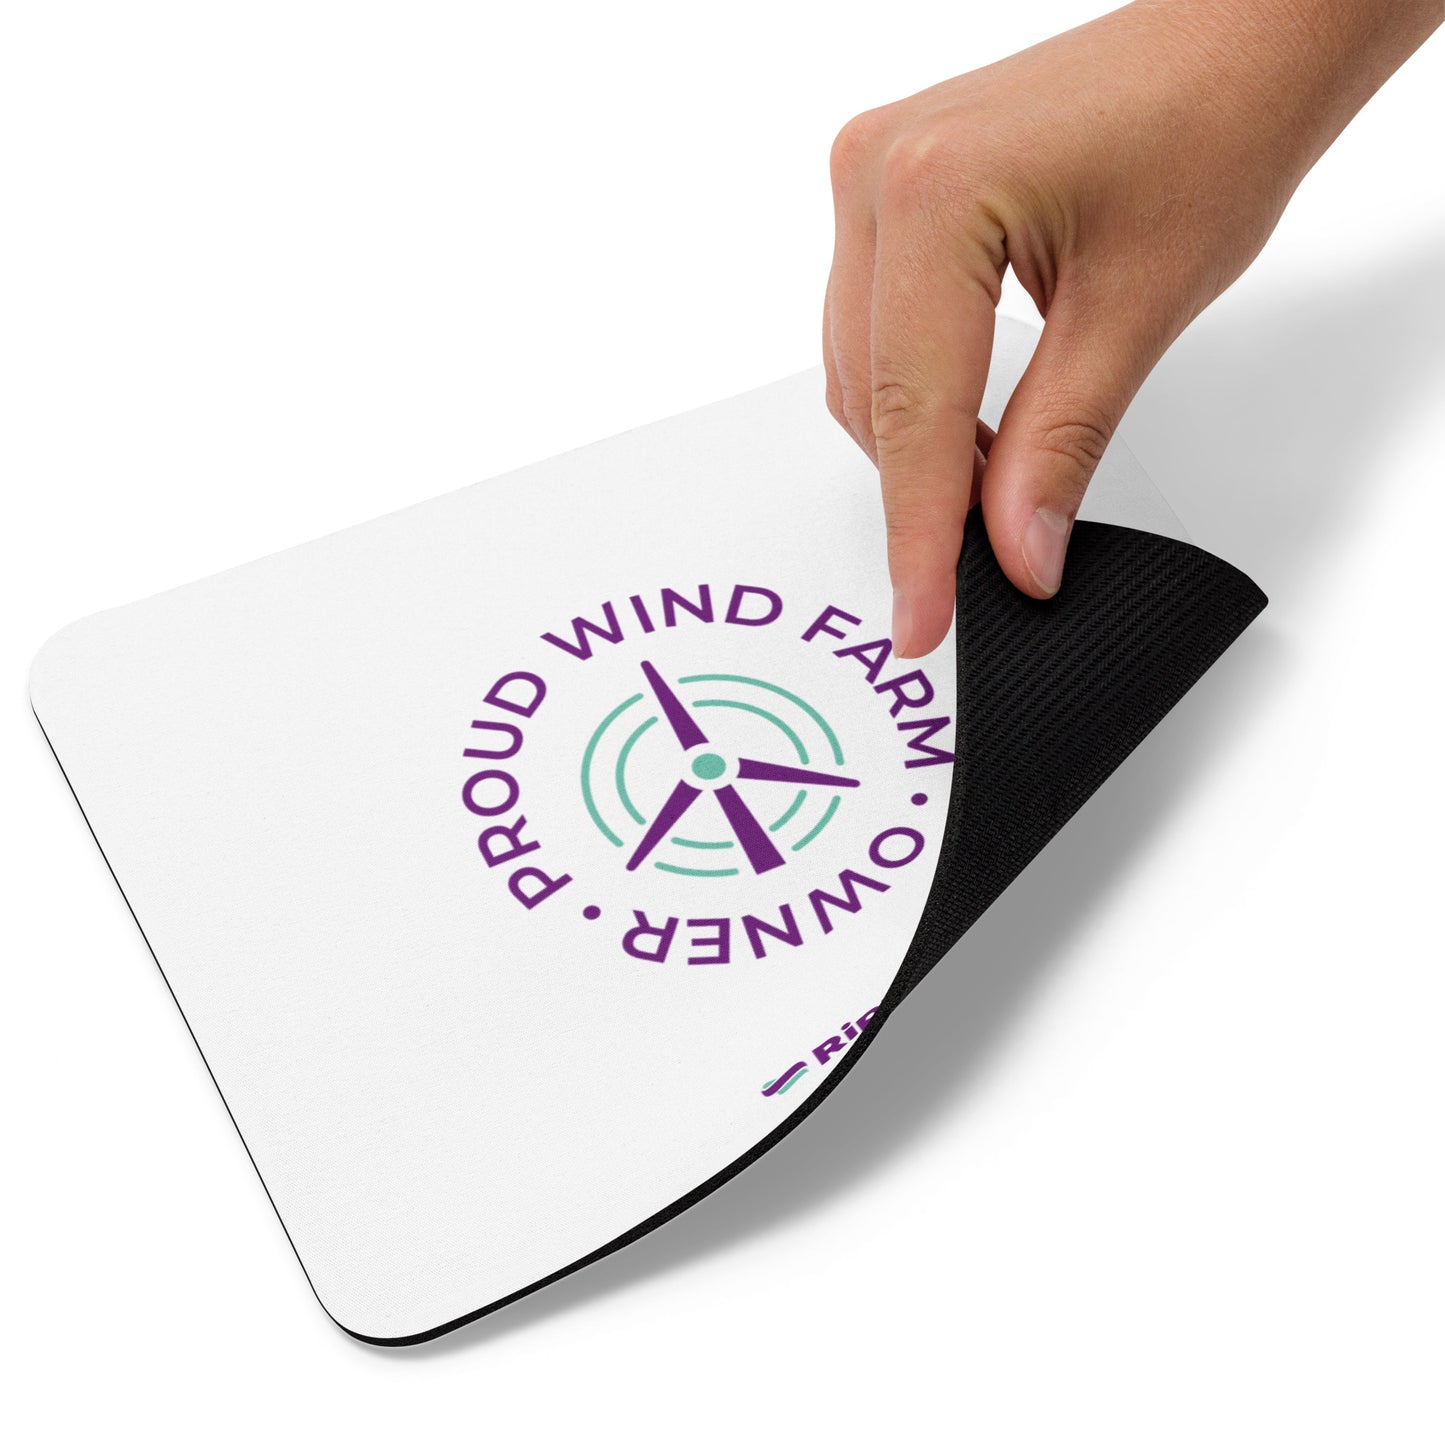 Proud wind farm owner mouse pad